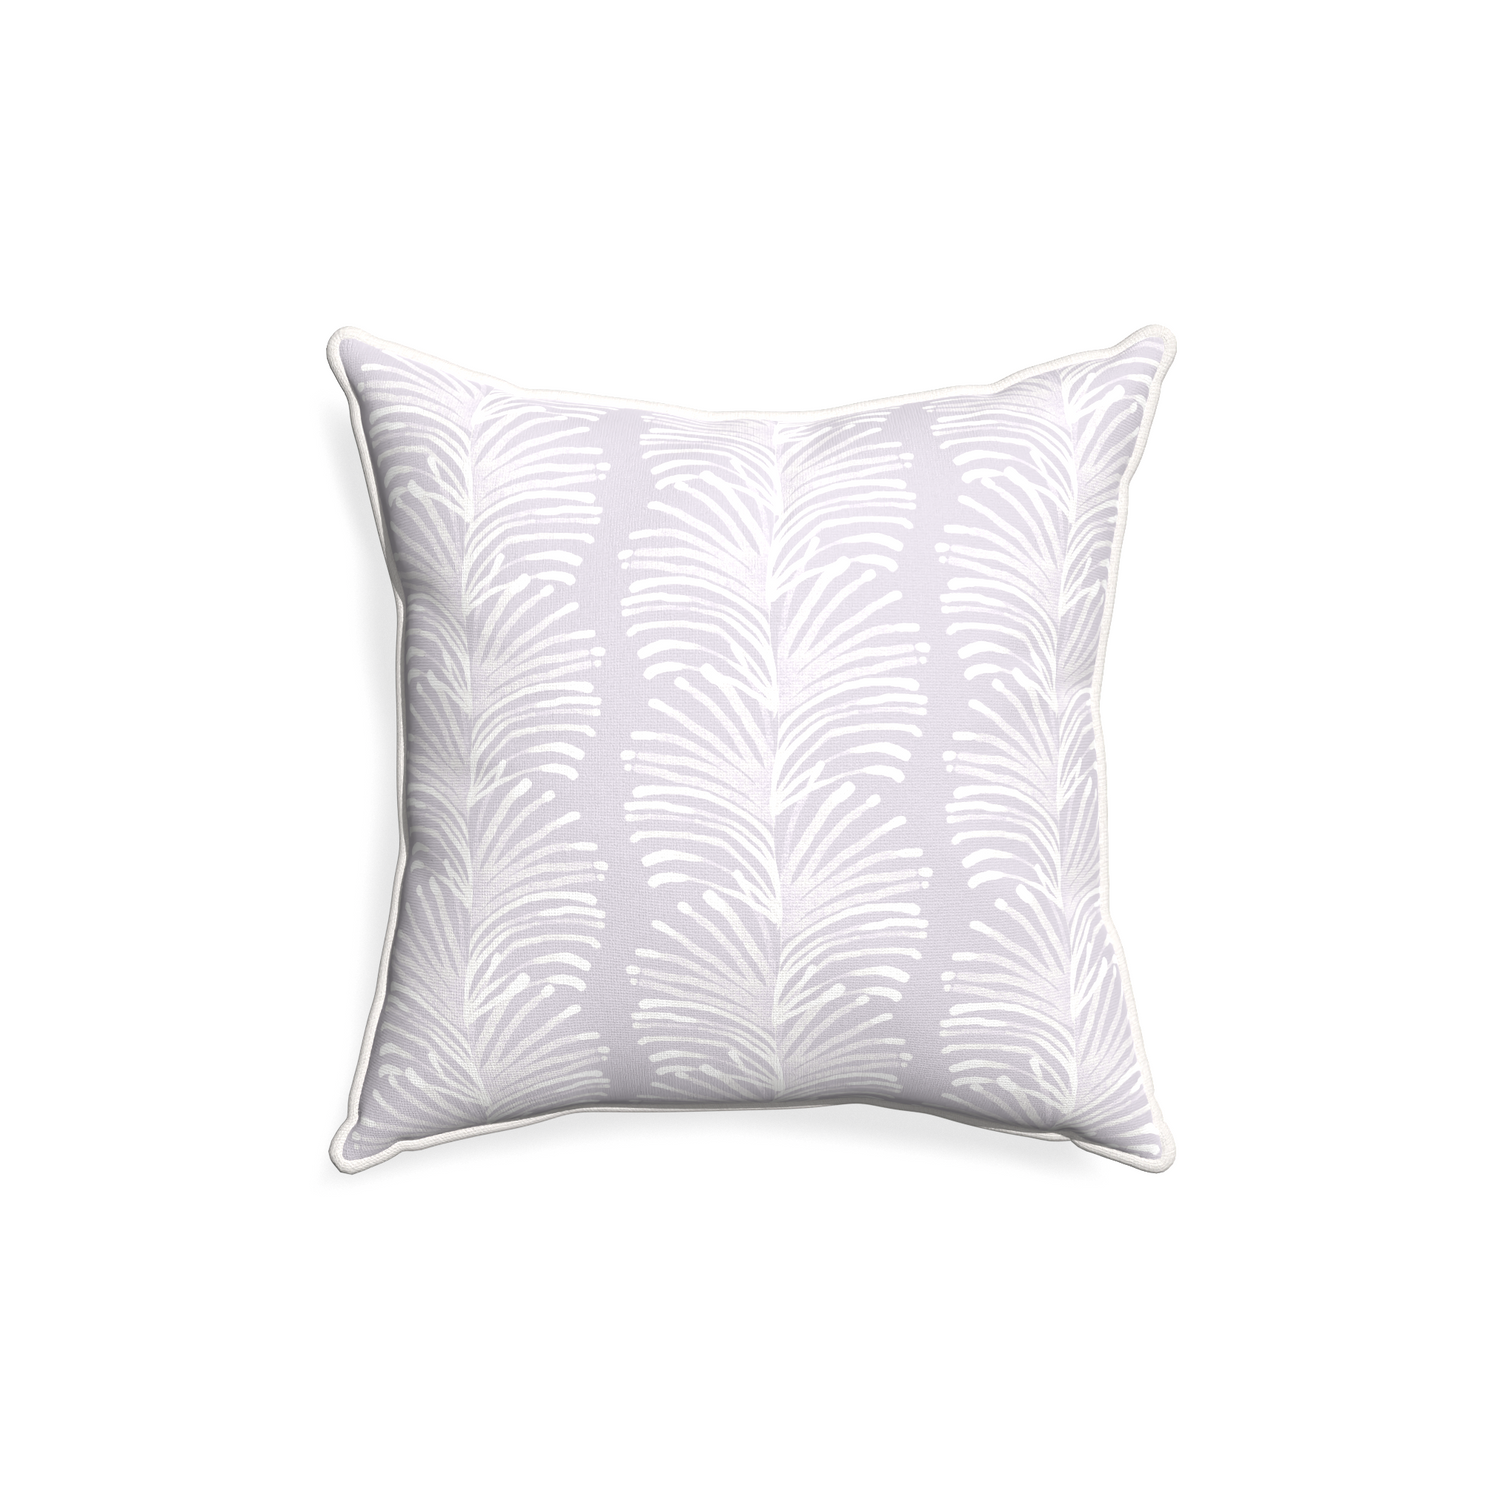 18-square emma lavender custom lavender botanical stripepillow with snow piping on white background